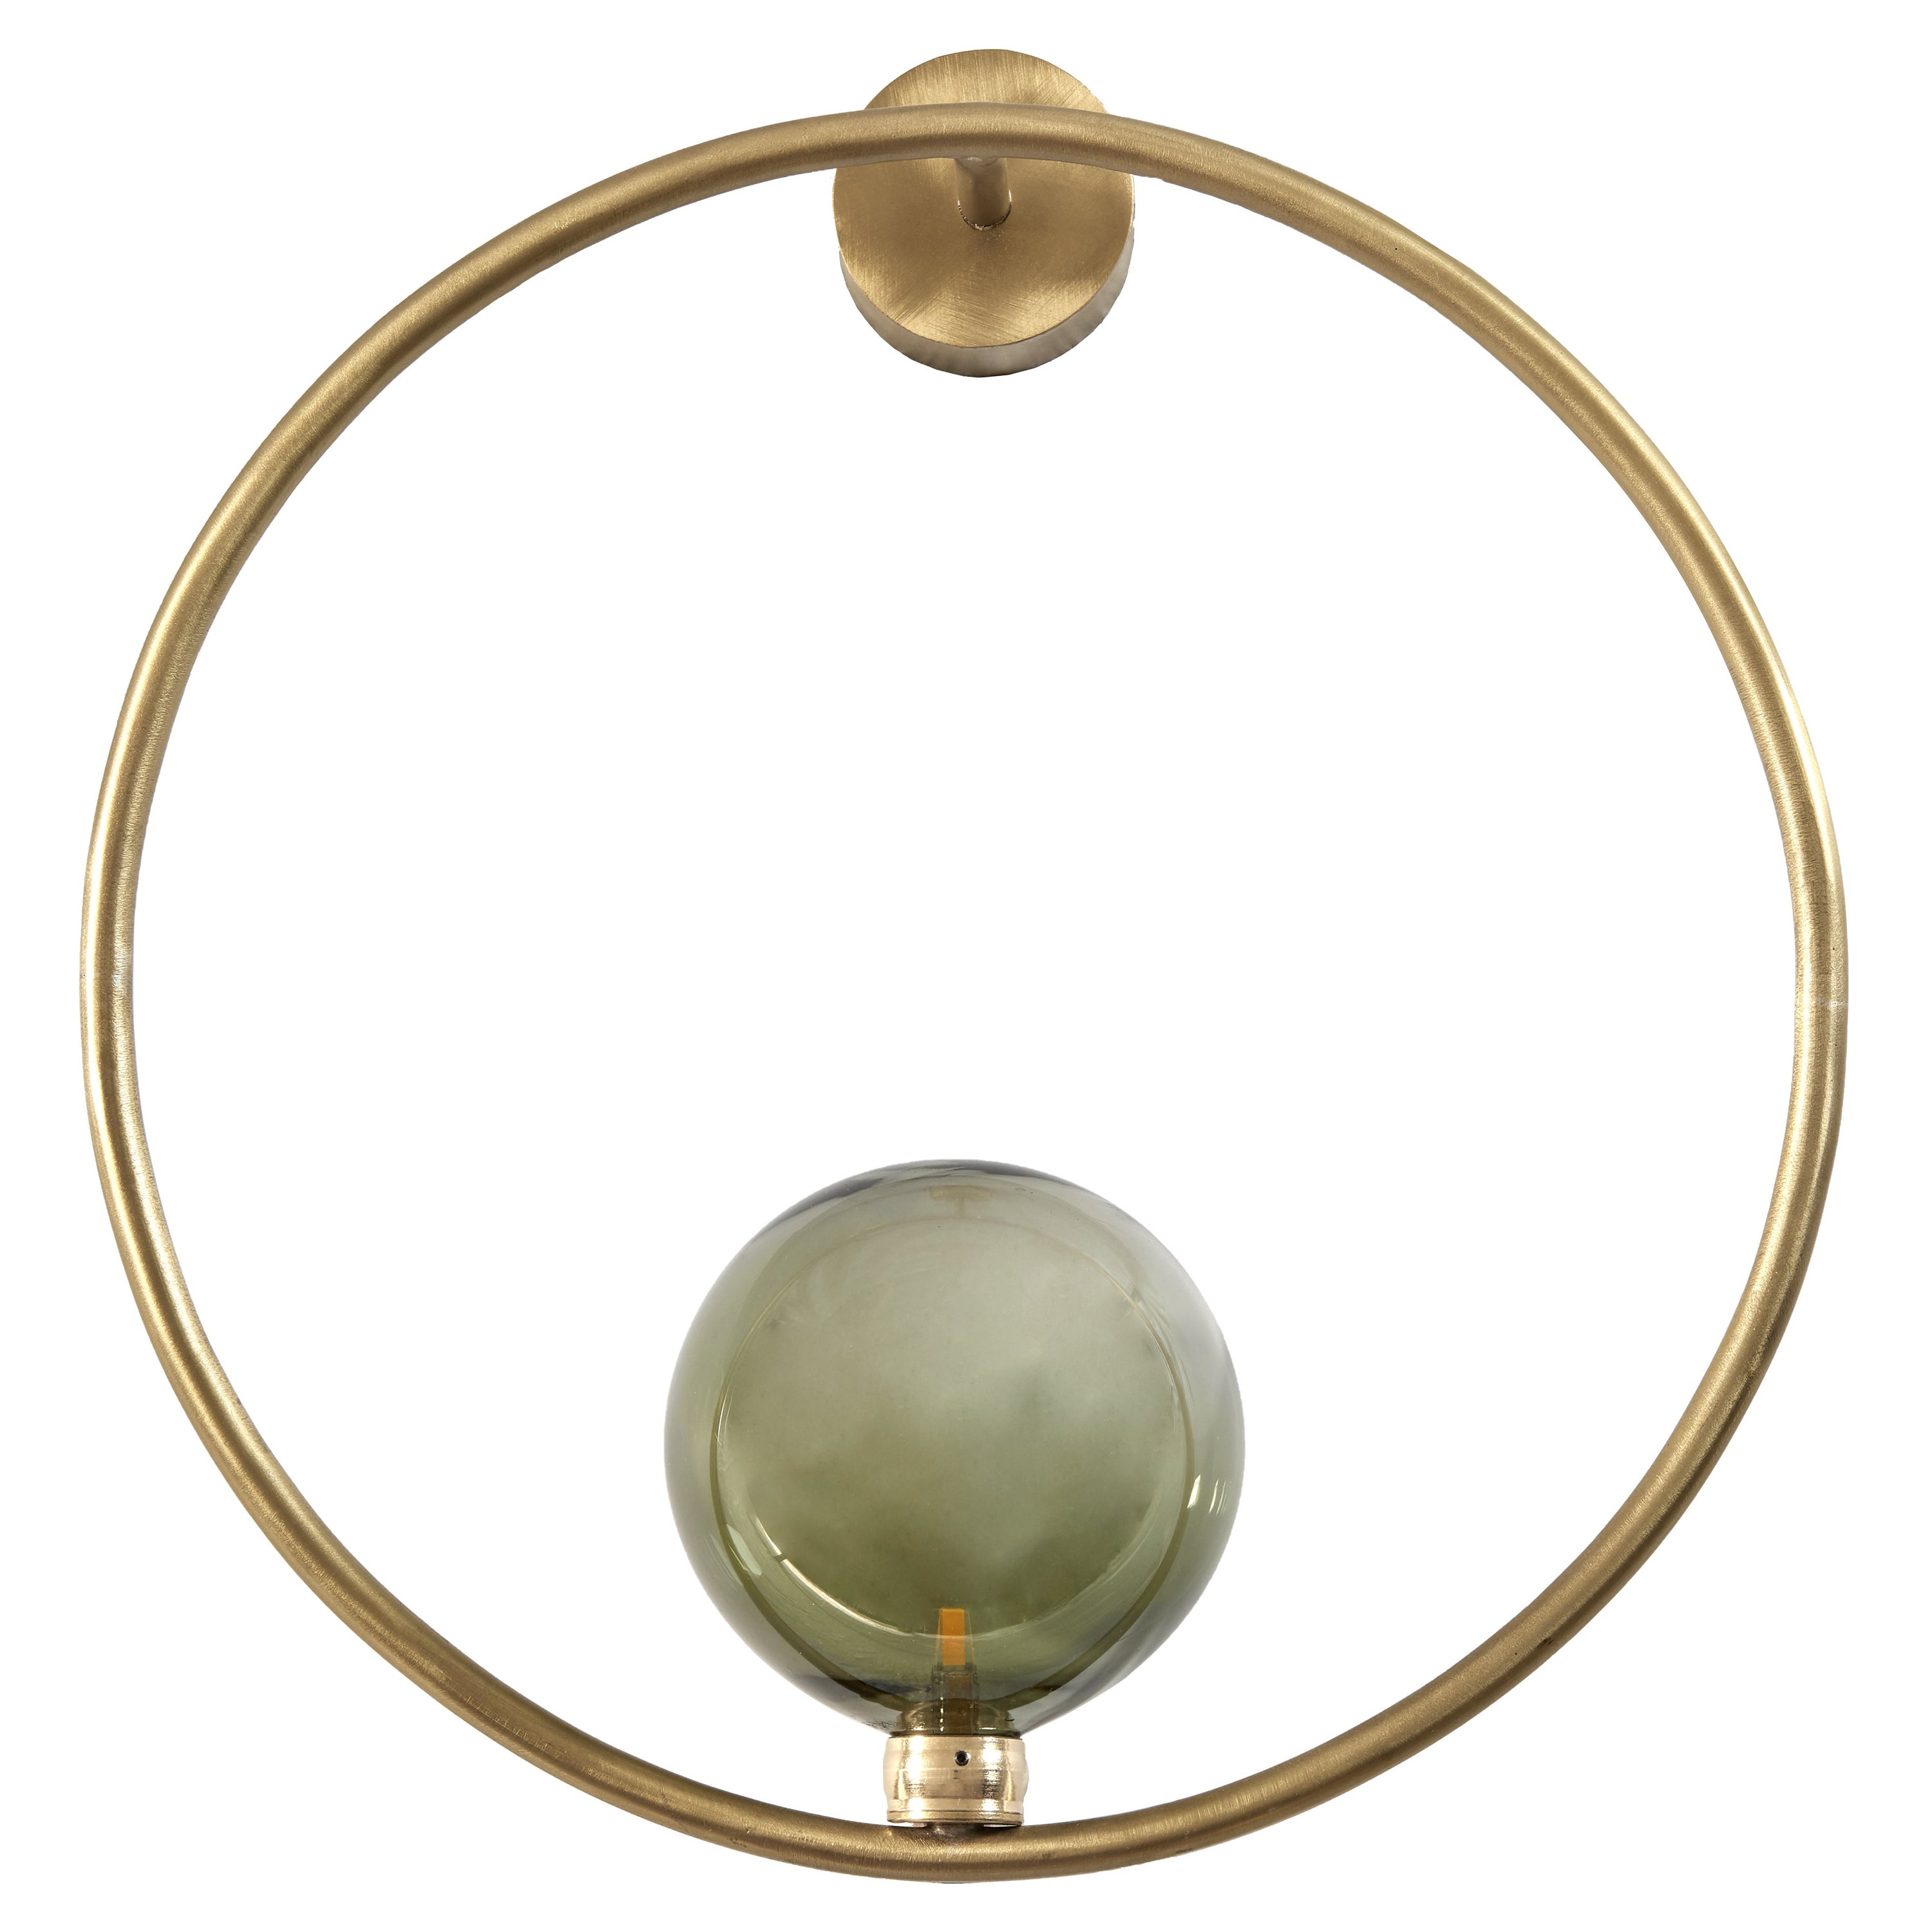 Wall lamp in brushed brass and hand blown glass
by Emilie Lemardeley, 21st century, handmade in France. 

Measures: Height: 15 in 
Width: 15 in
Deep: 7.48 in
Weight: around 1 kilo

Bulb: Led, G4, 5W, 12V
Current driver inside the lamp
CE marking.